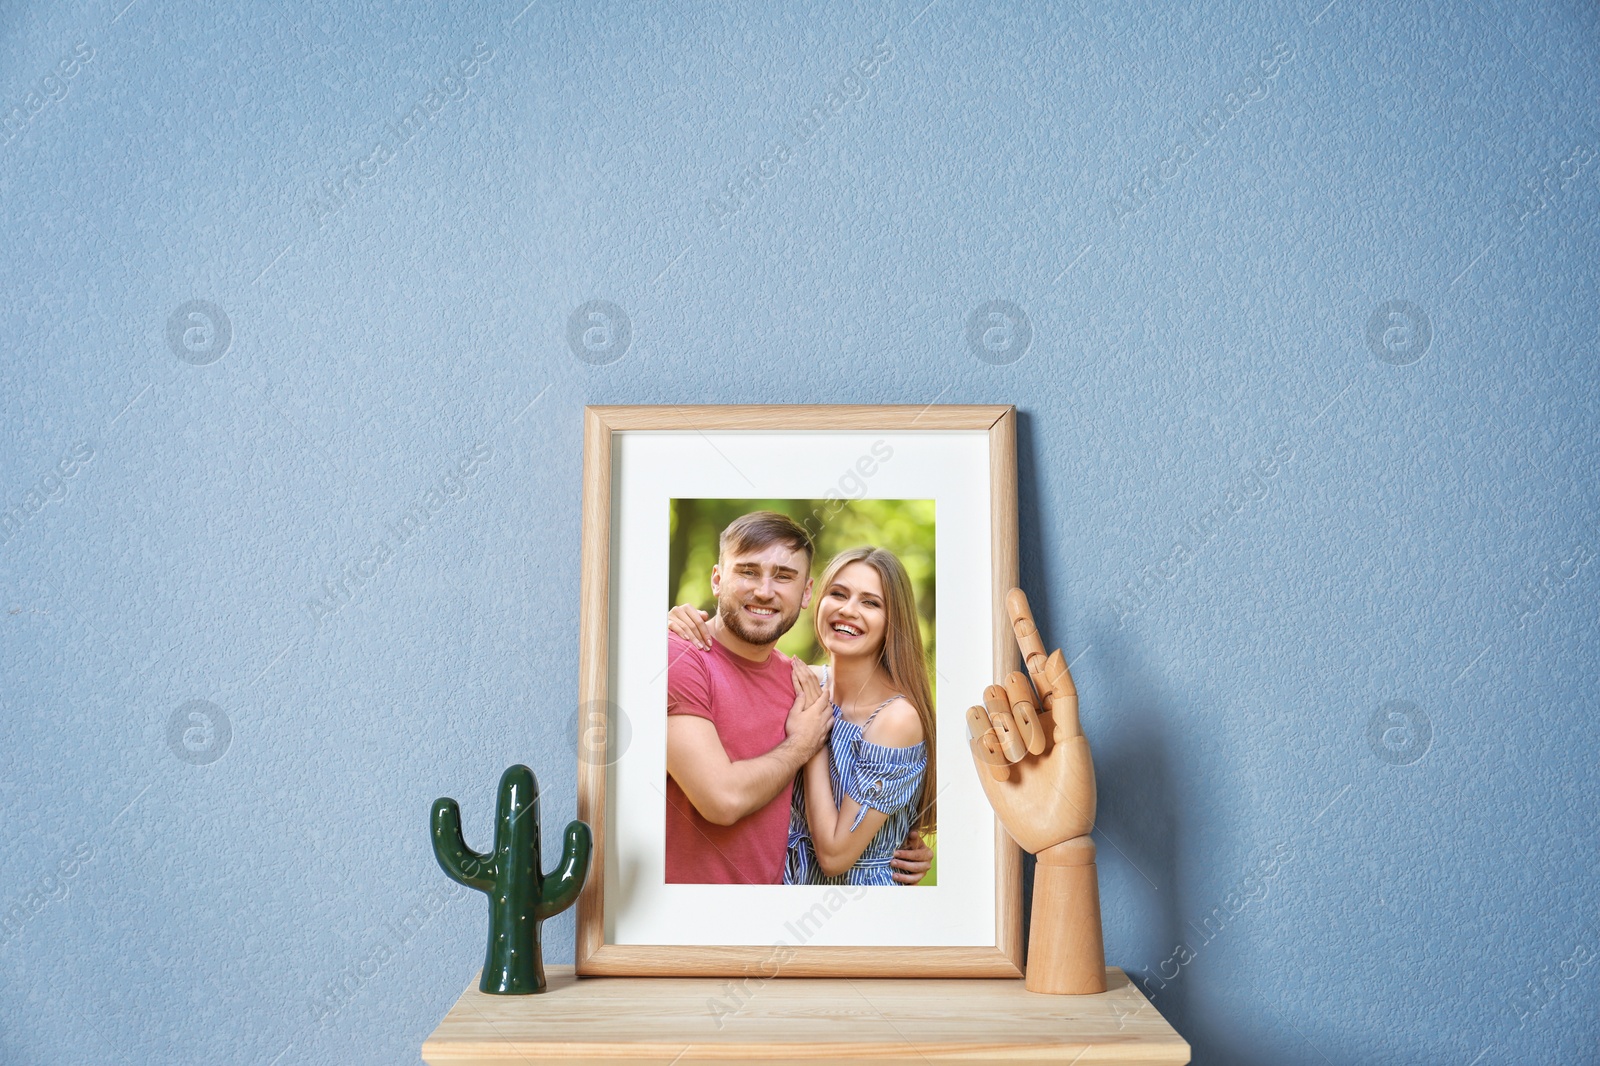 Image of Portrait of happy young couple in photo frame on table near light blue wall